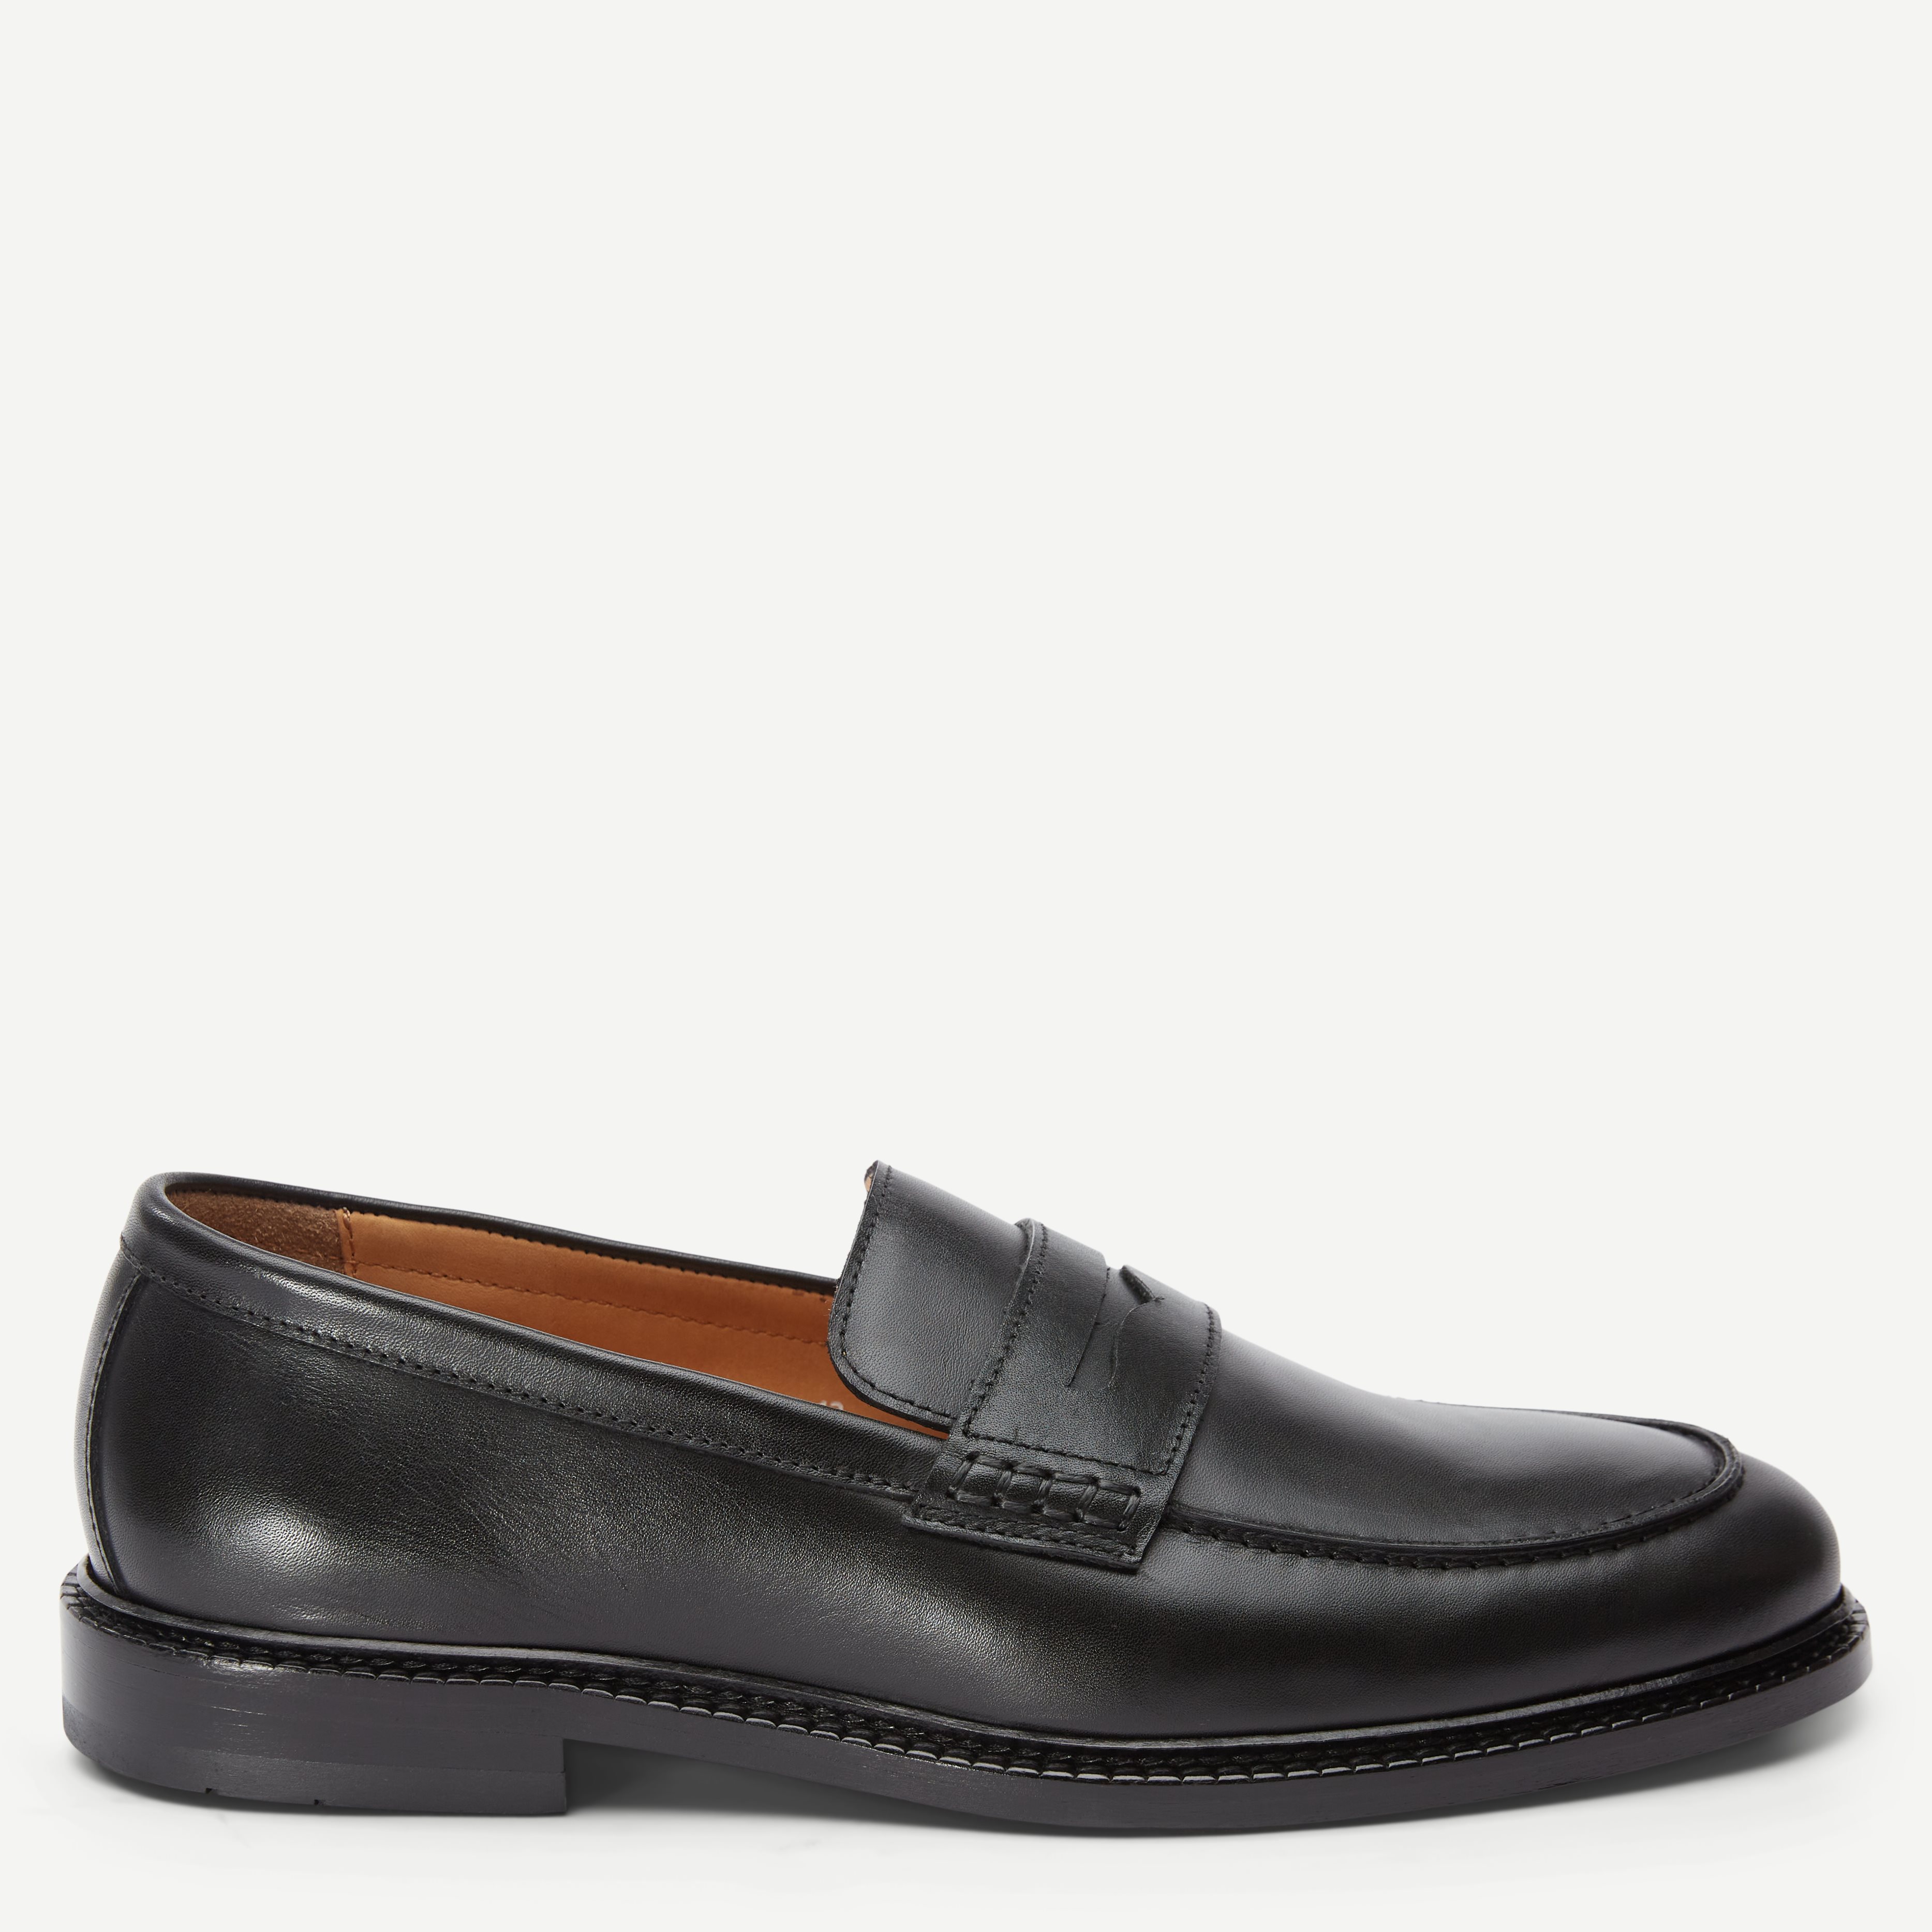 30858 Loafers - Shoes - Black